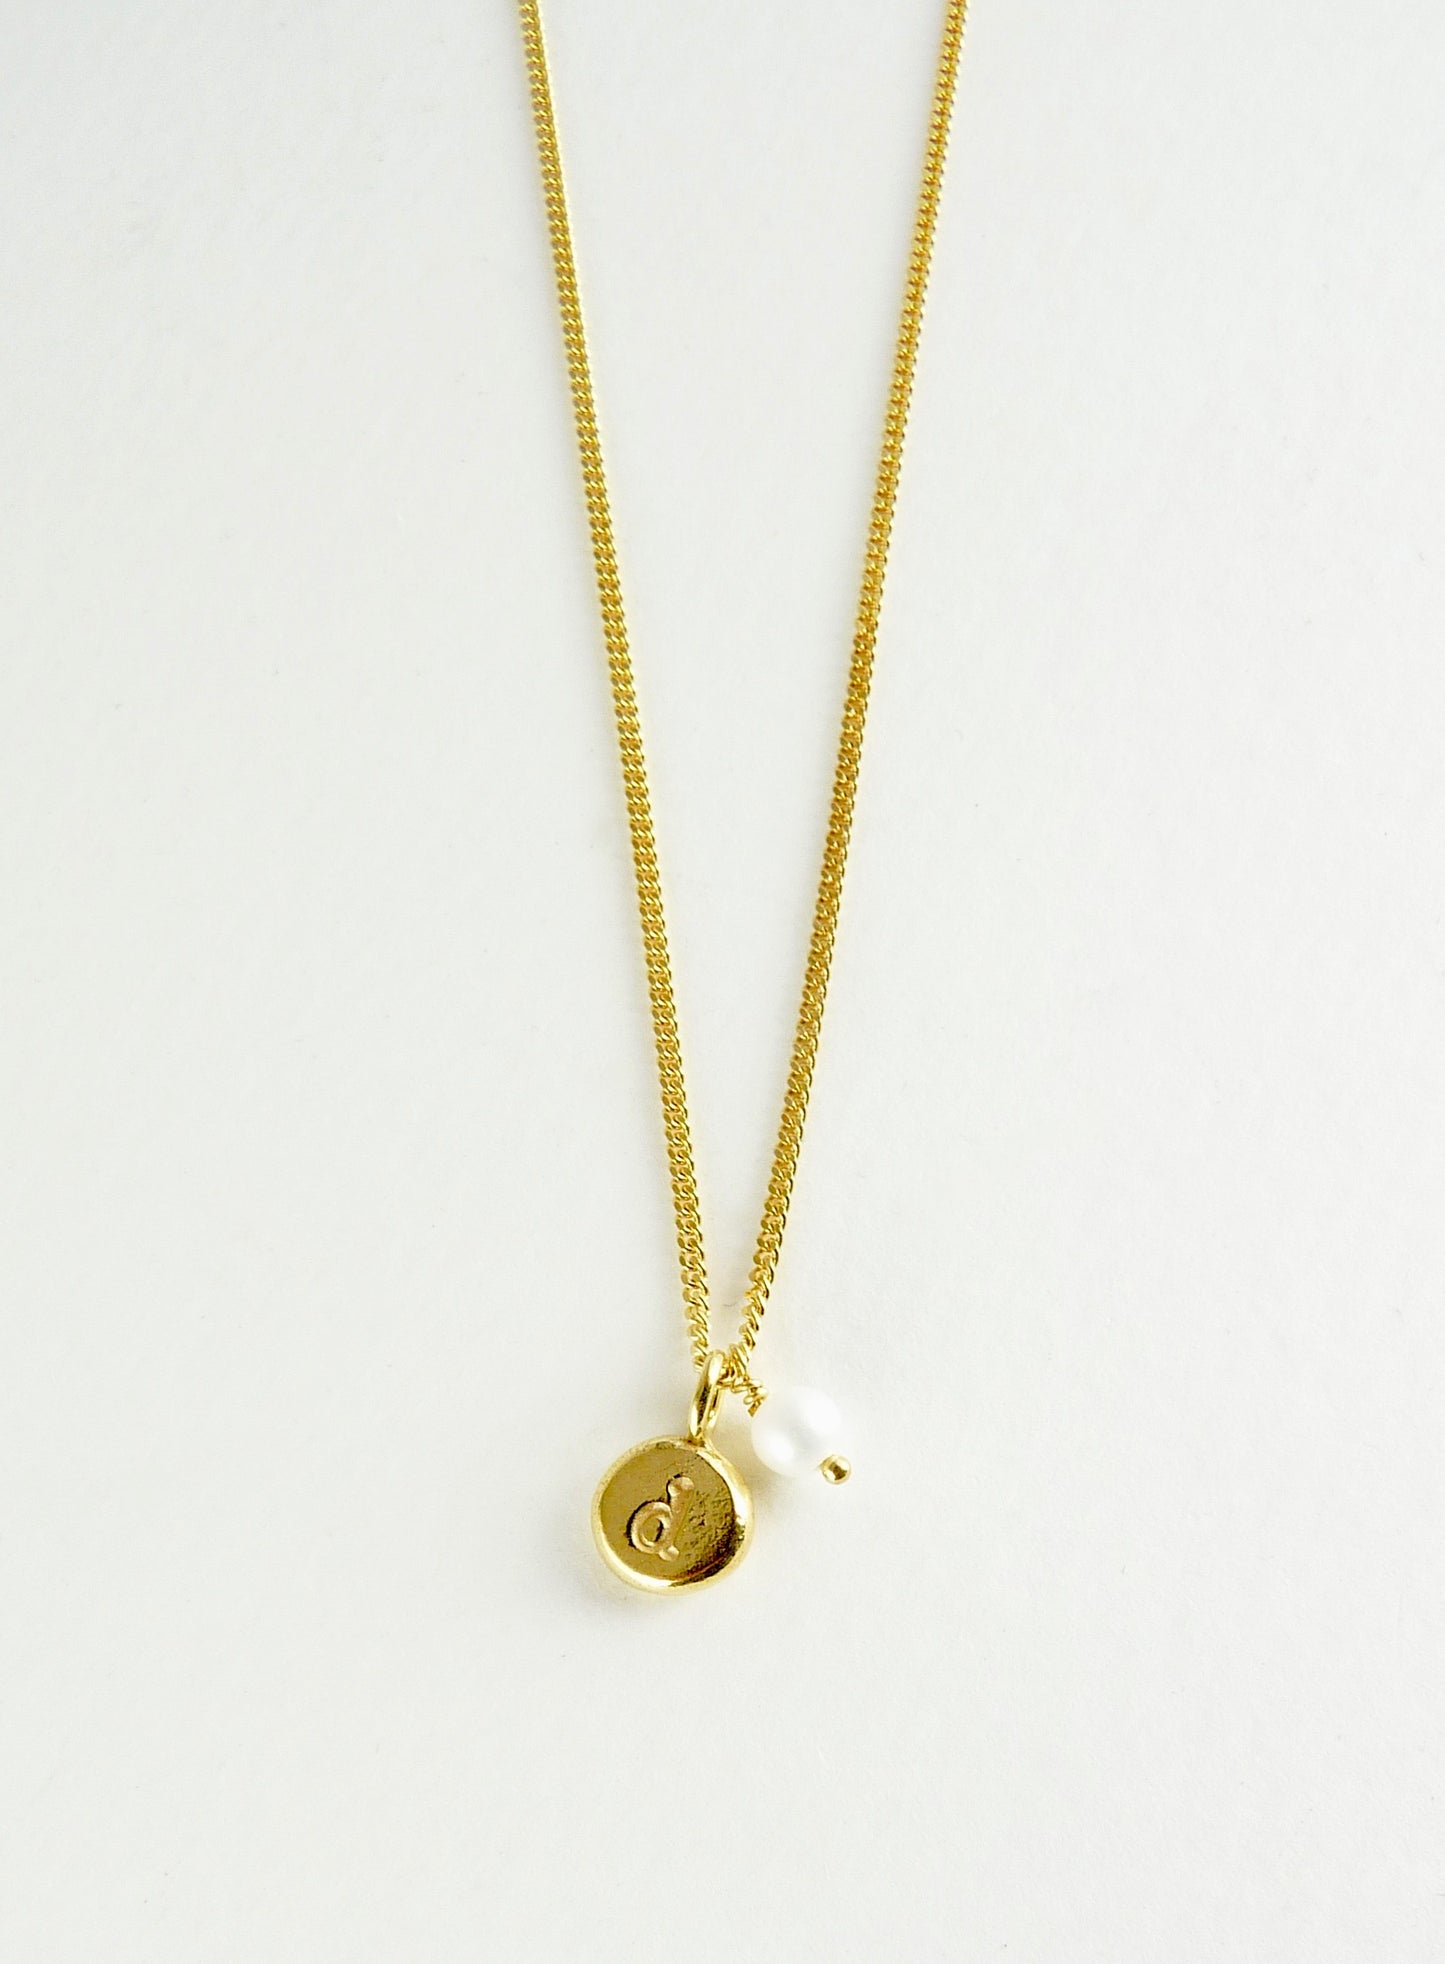 Initial & Birthstone Delicate Necklace